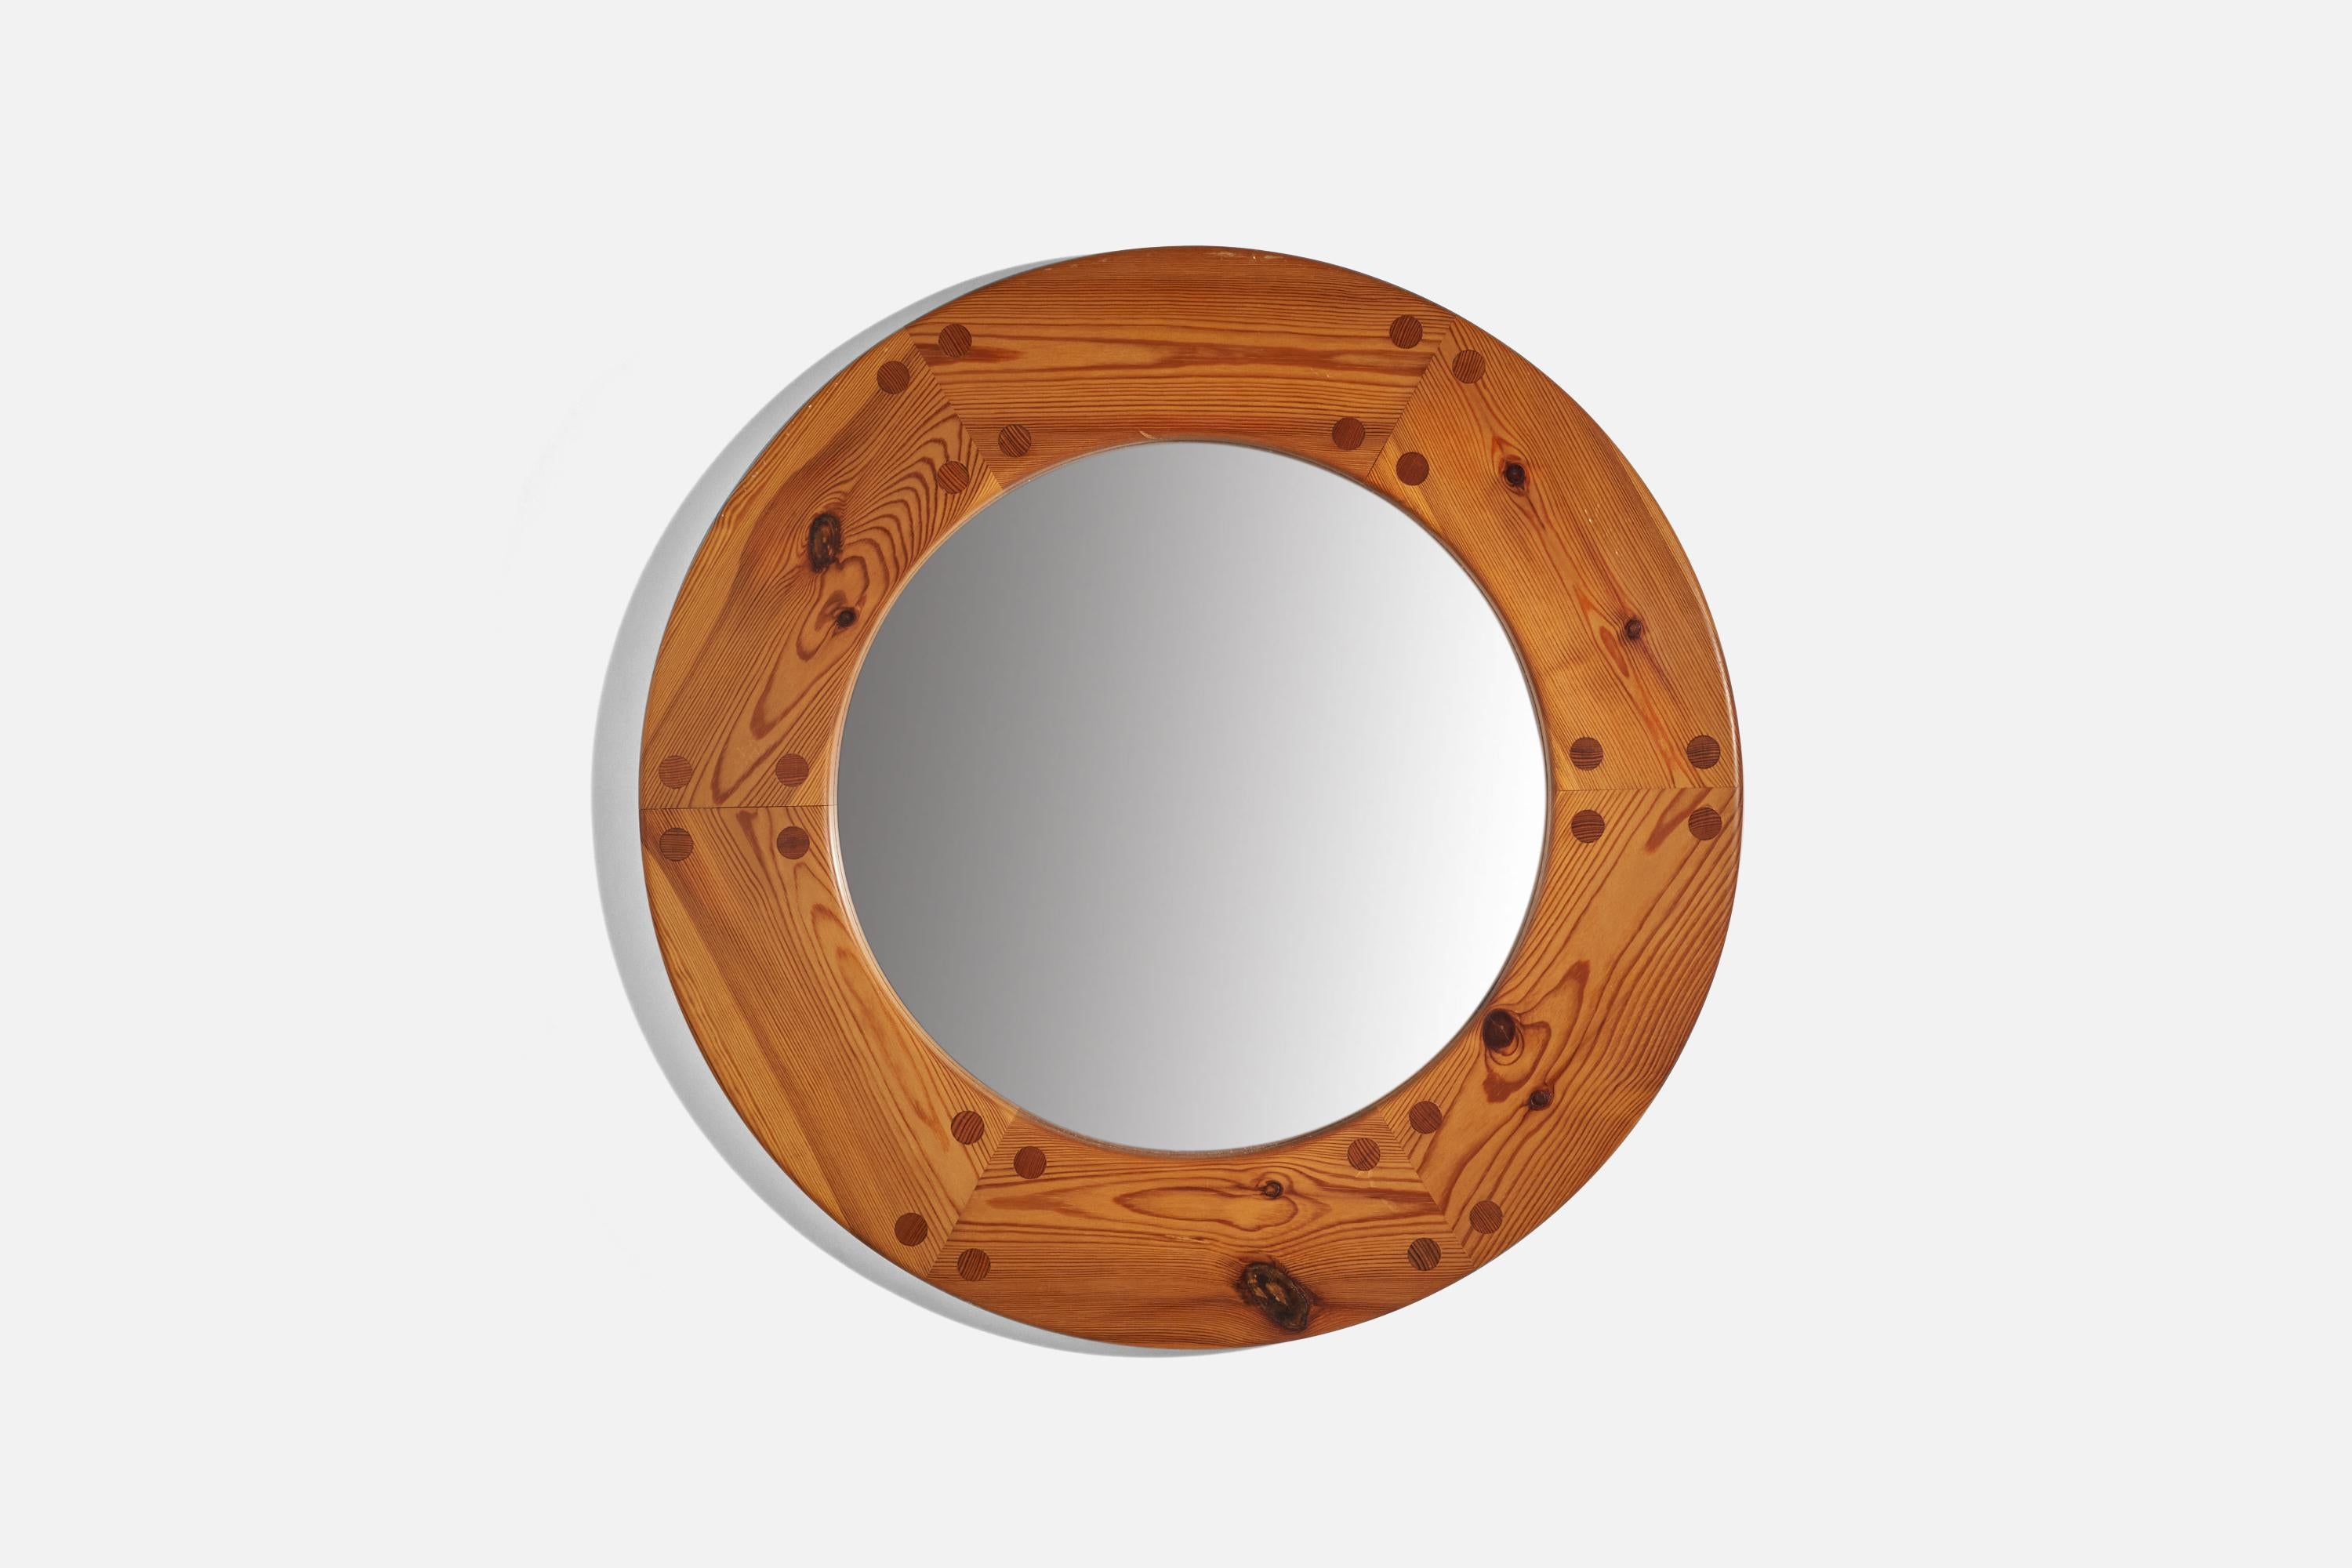 A solid pine round wall mirror designed by Uno Kristiansson and produced by Luxus, Sweden, 1960s.